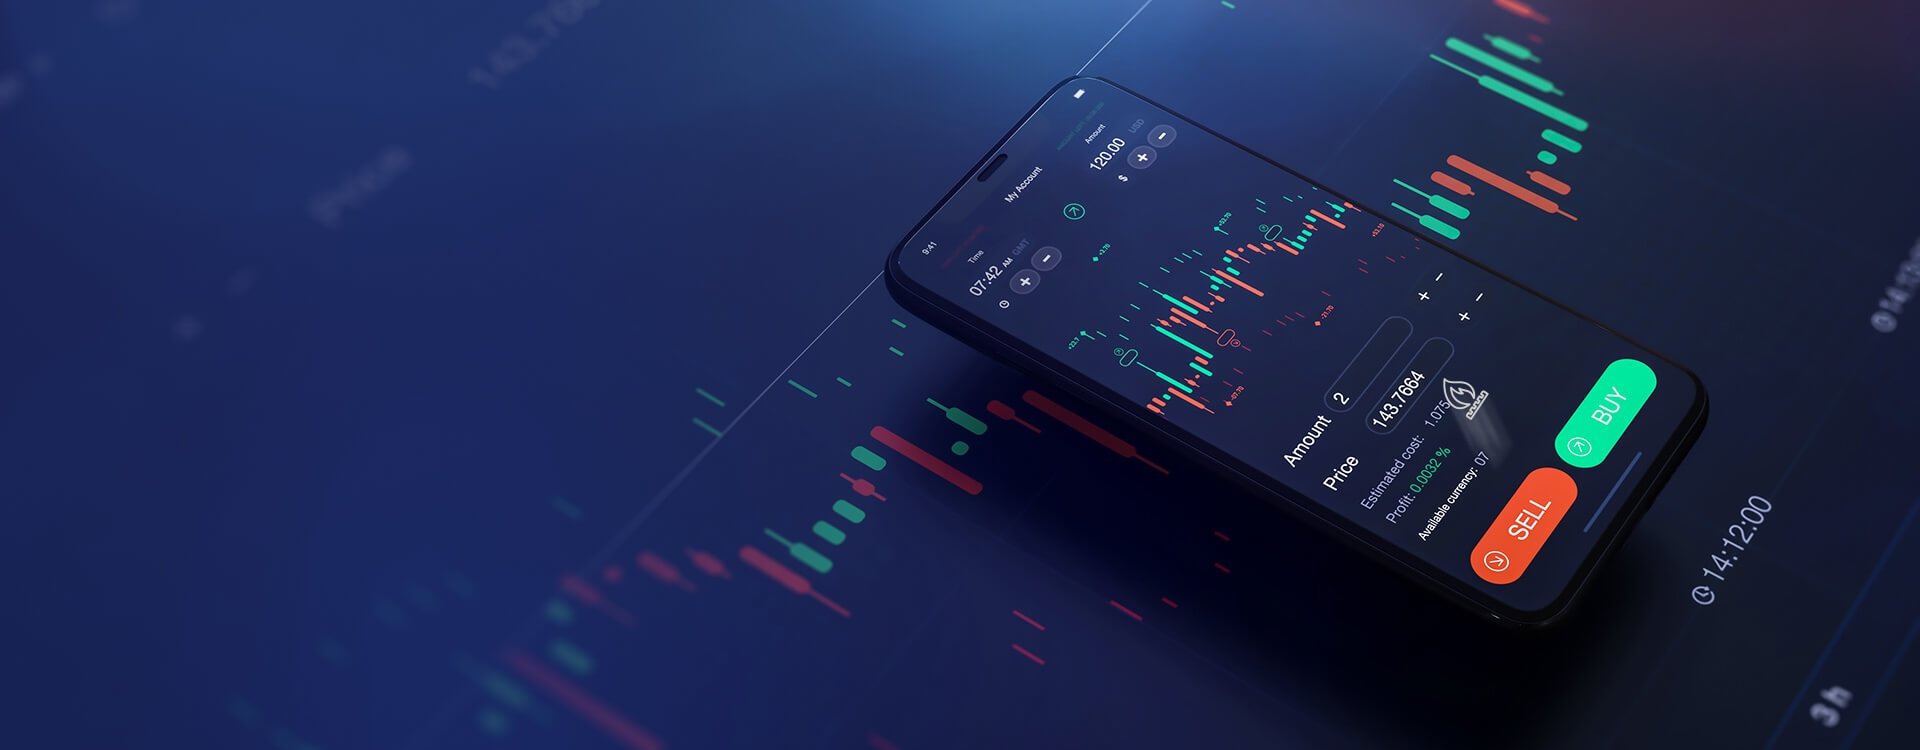 energy and commodity trading platform on the smartphone screen